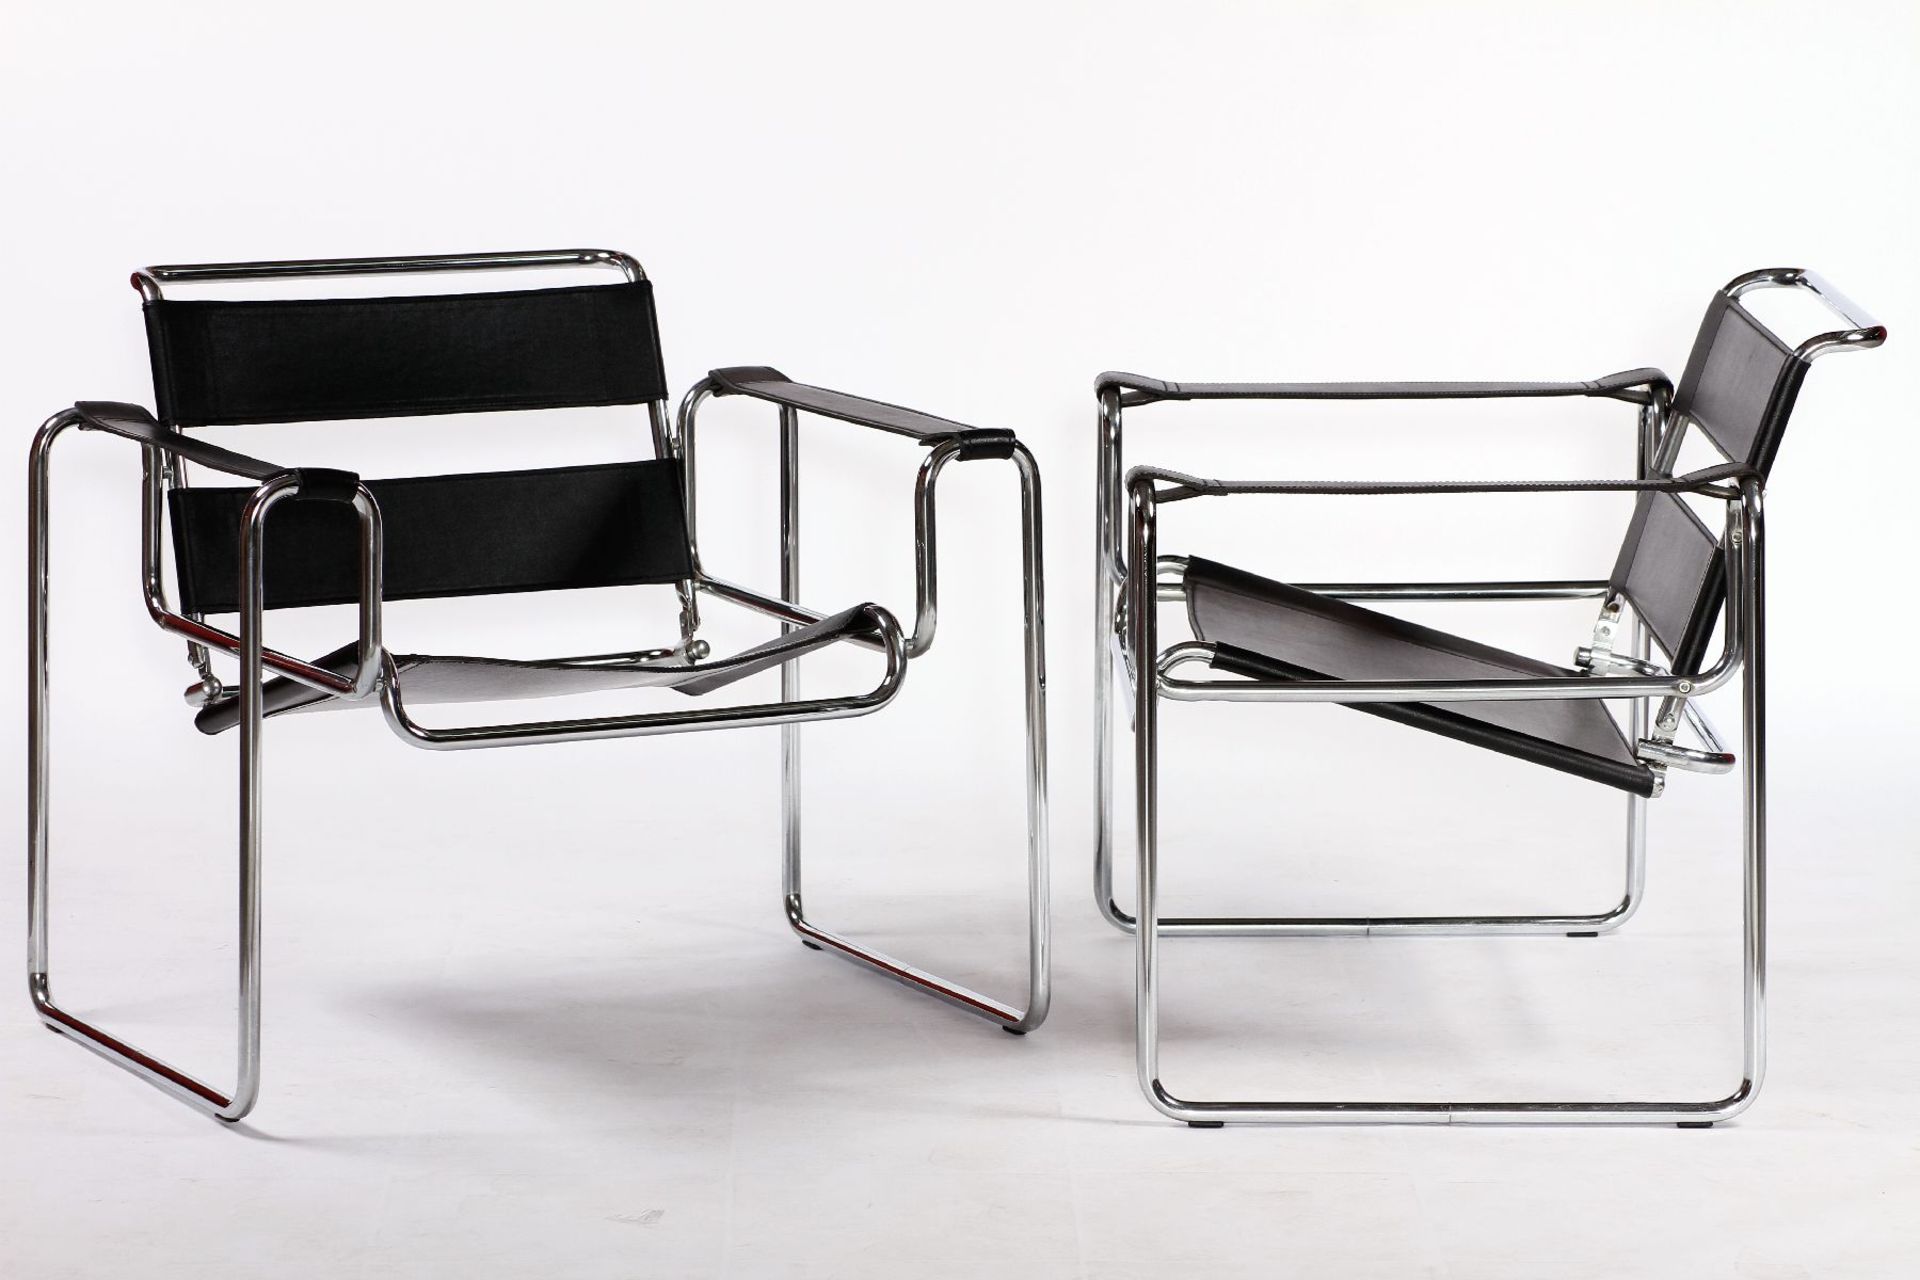 2 armchairs, Bauhaus style from 1928/29, replica based on the design by Marcel Breuer, chromed